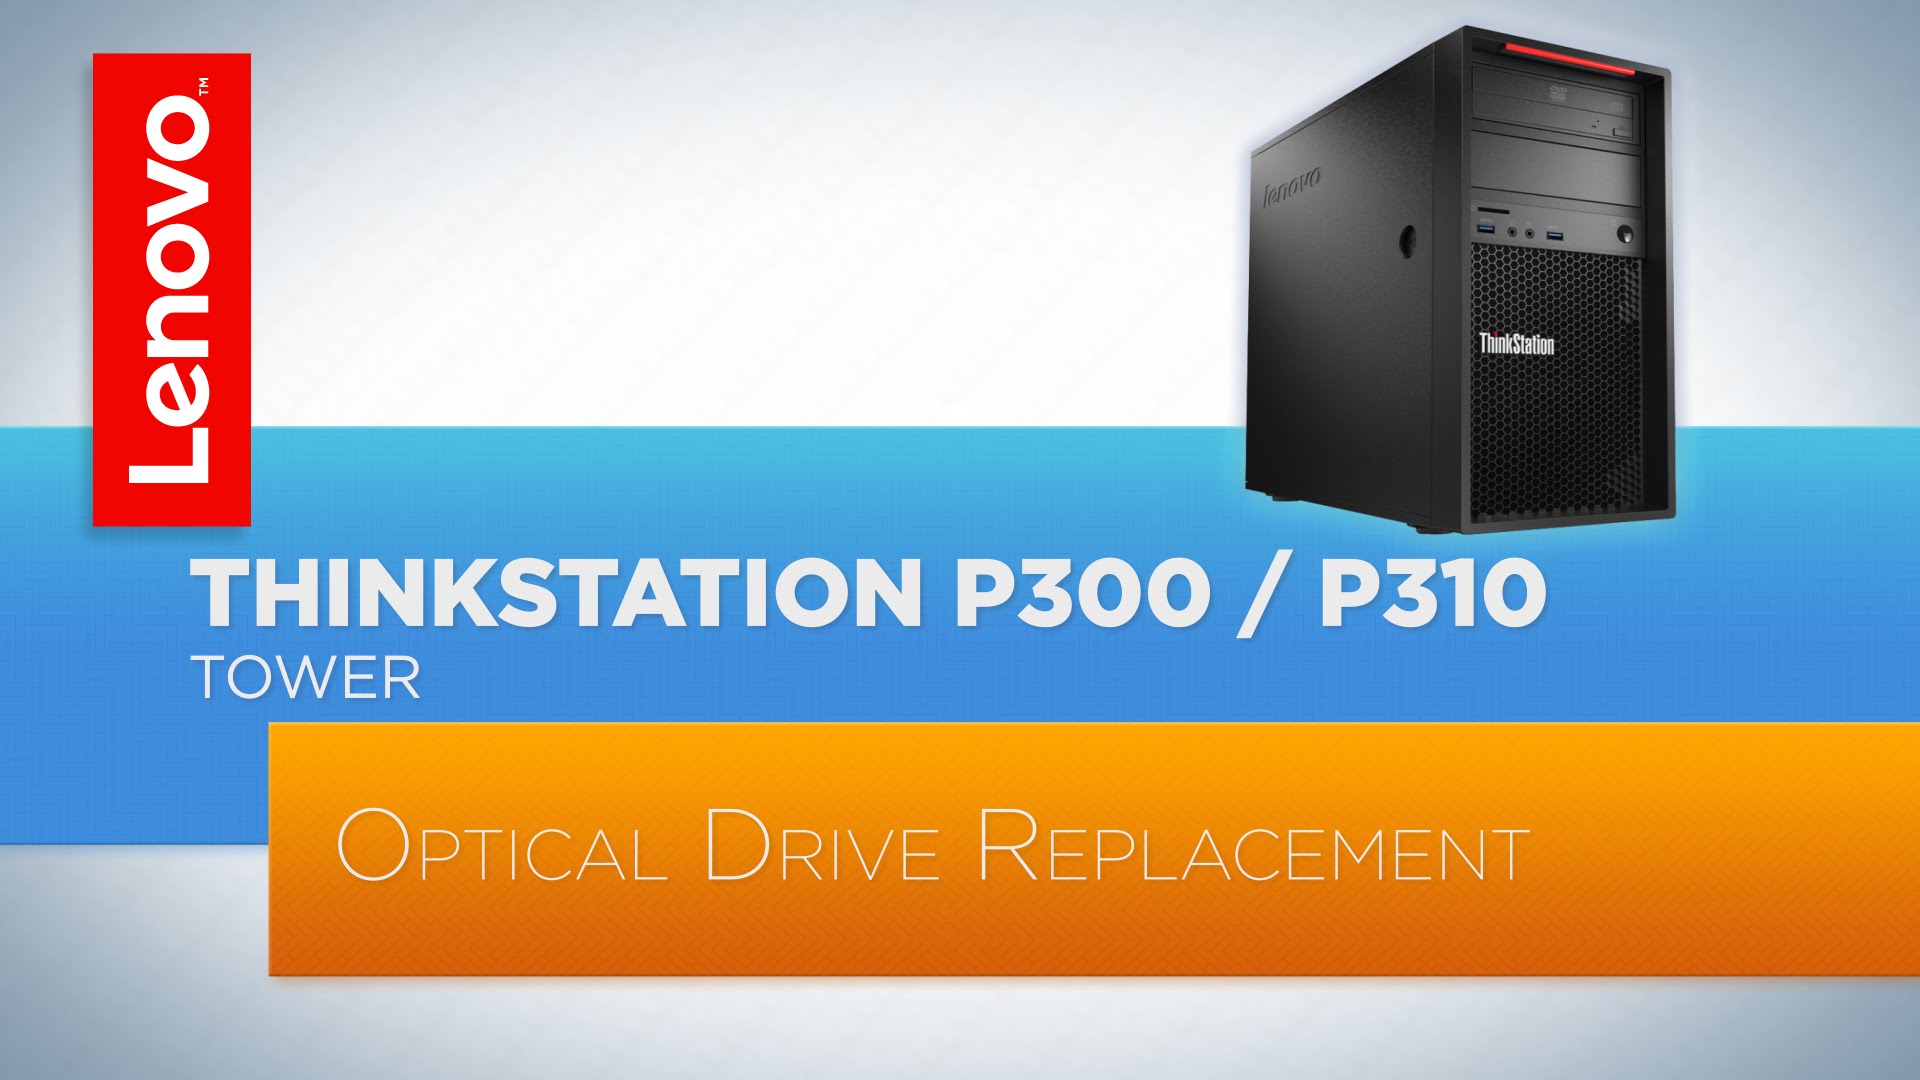 ThinkStation P300 / P310 Tower - Optical Drive Replacement - YouTube